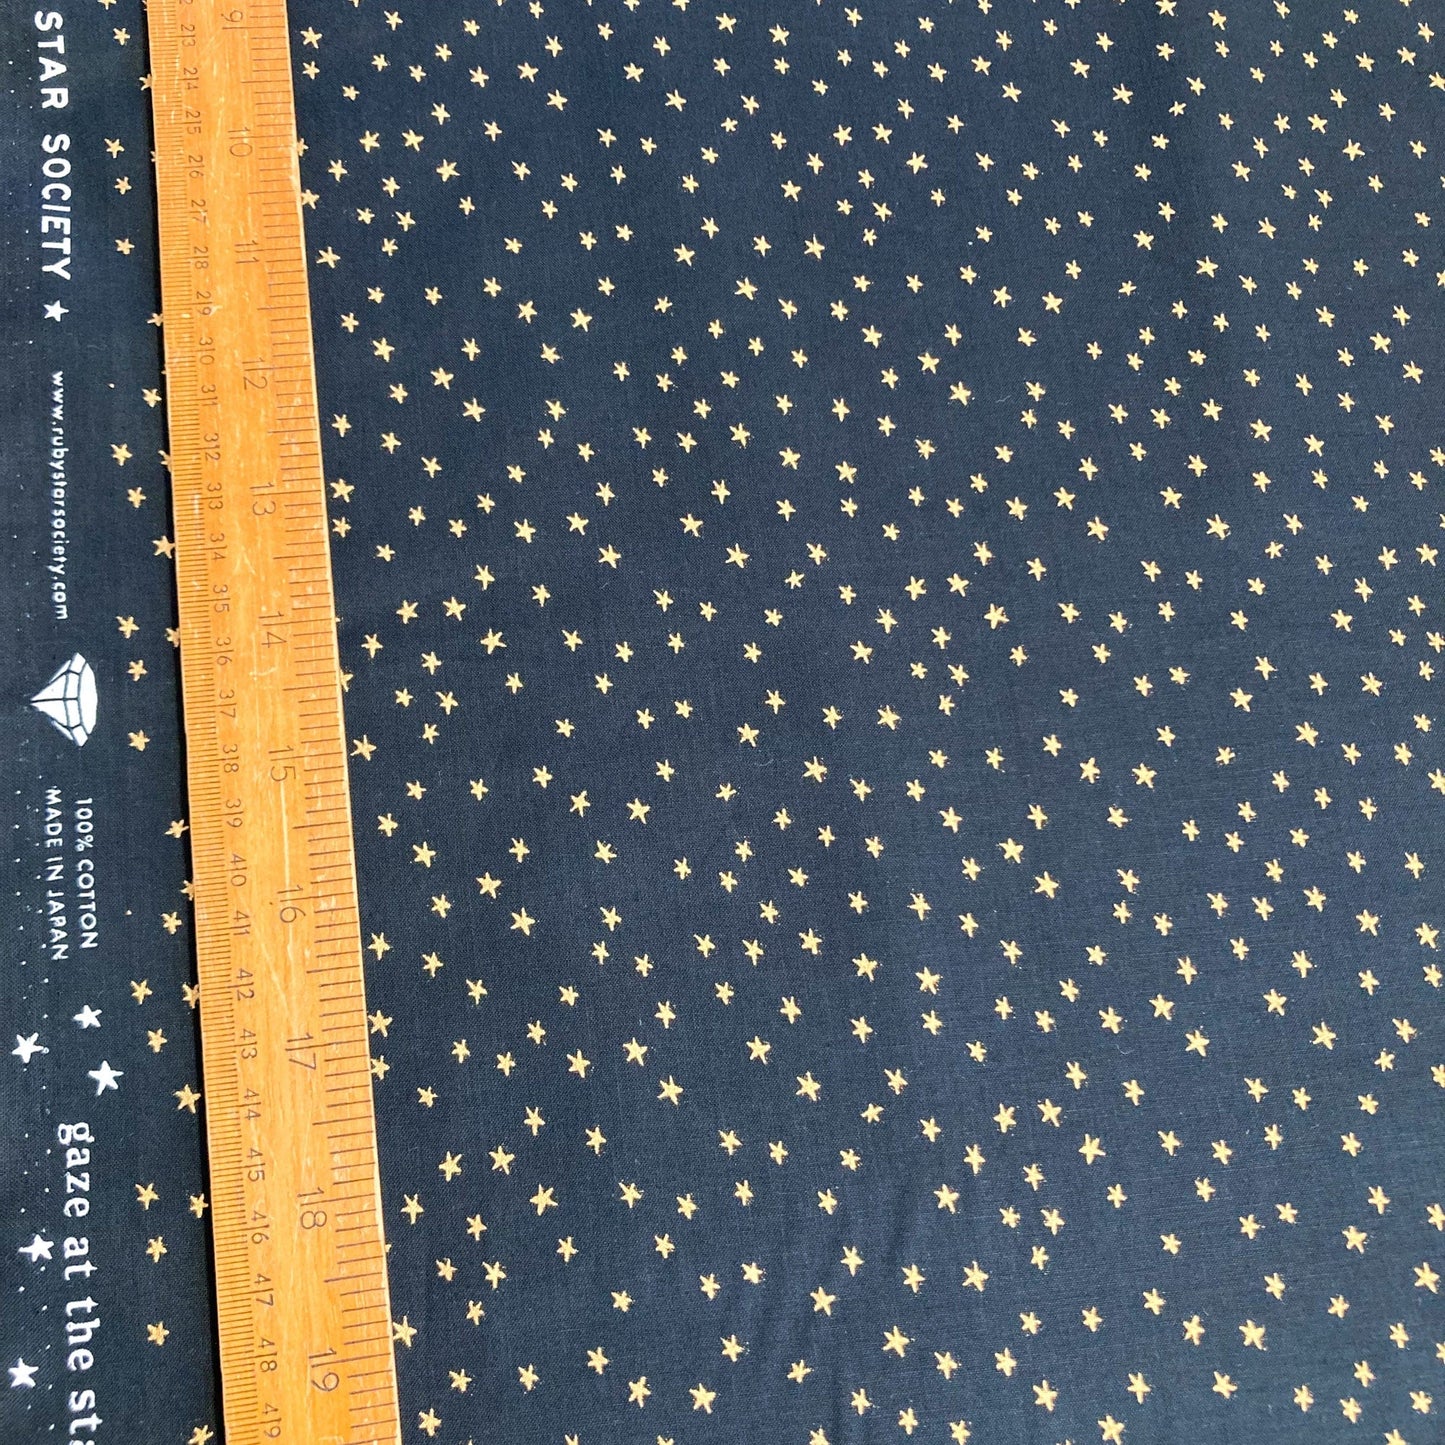 Ruby Star Society Quilting Cotton 'Mini Starry' in Black and Gold